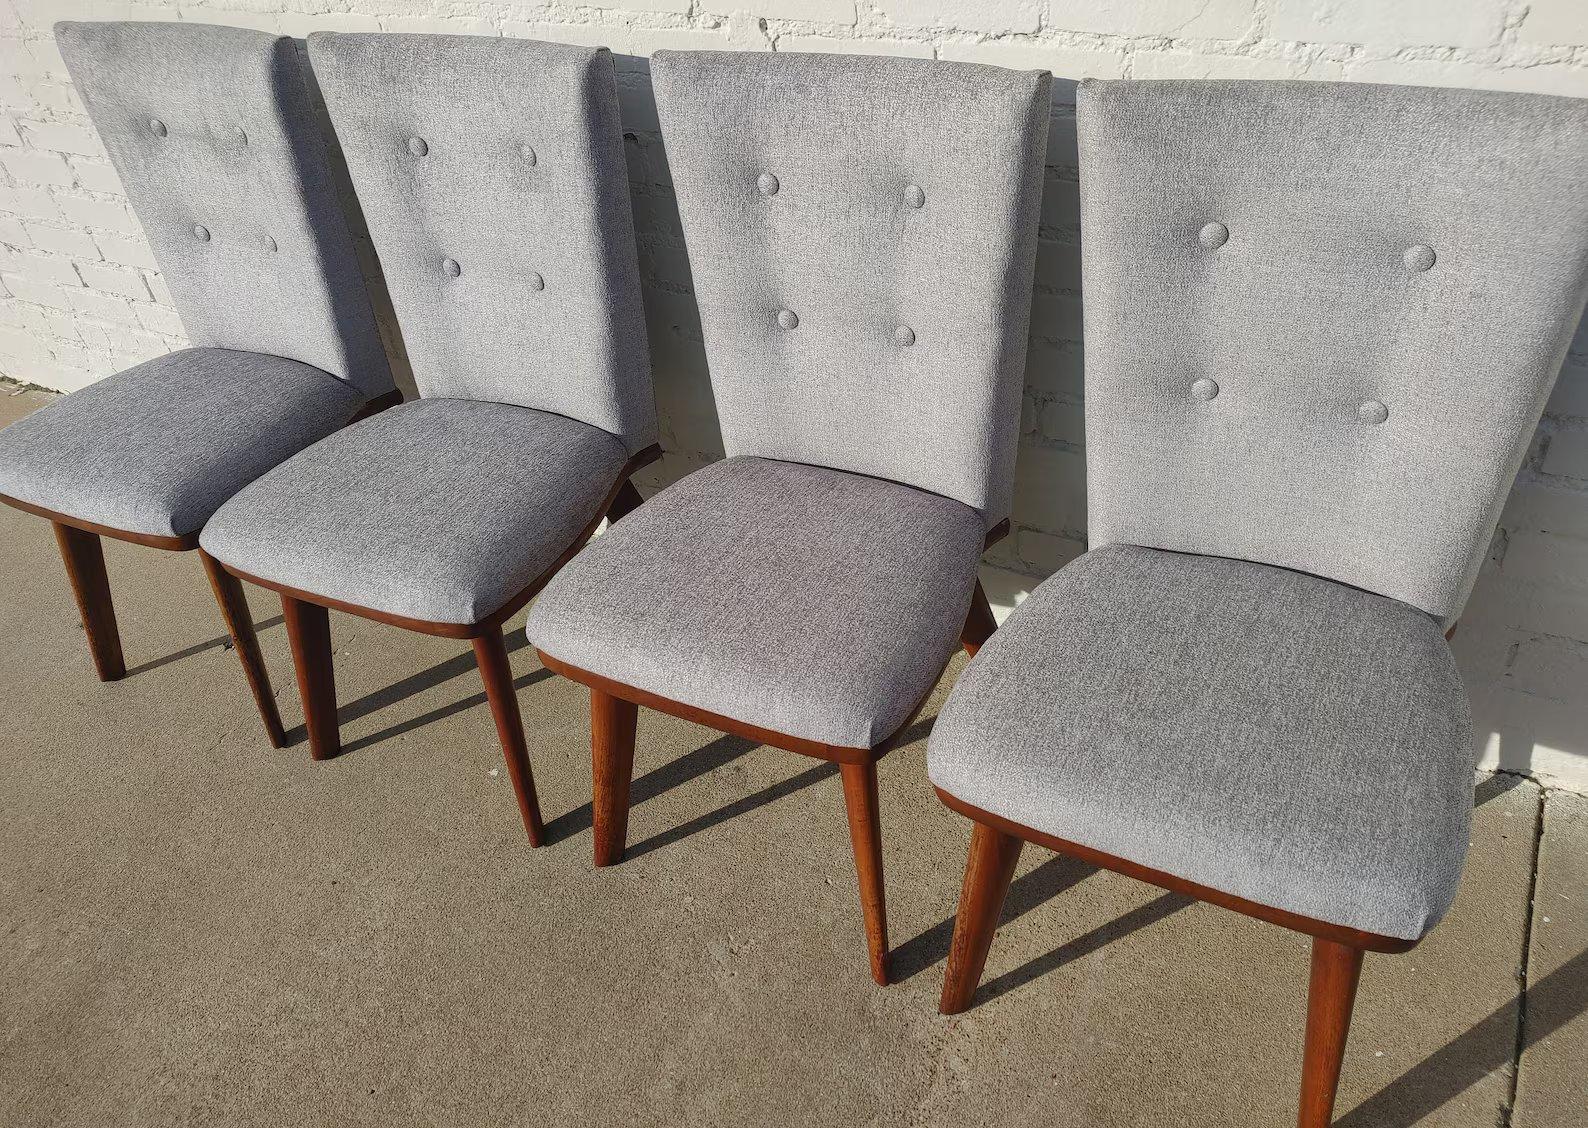 Set of 4 Mid Century Modern Solid Walnut Chairs by Bissman

Above average vintage condition and structurally sound. Has some expected finish wear and scratching on the legs. Upholstery is new. Outdoor listing pictures might appear slightly darker or